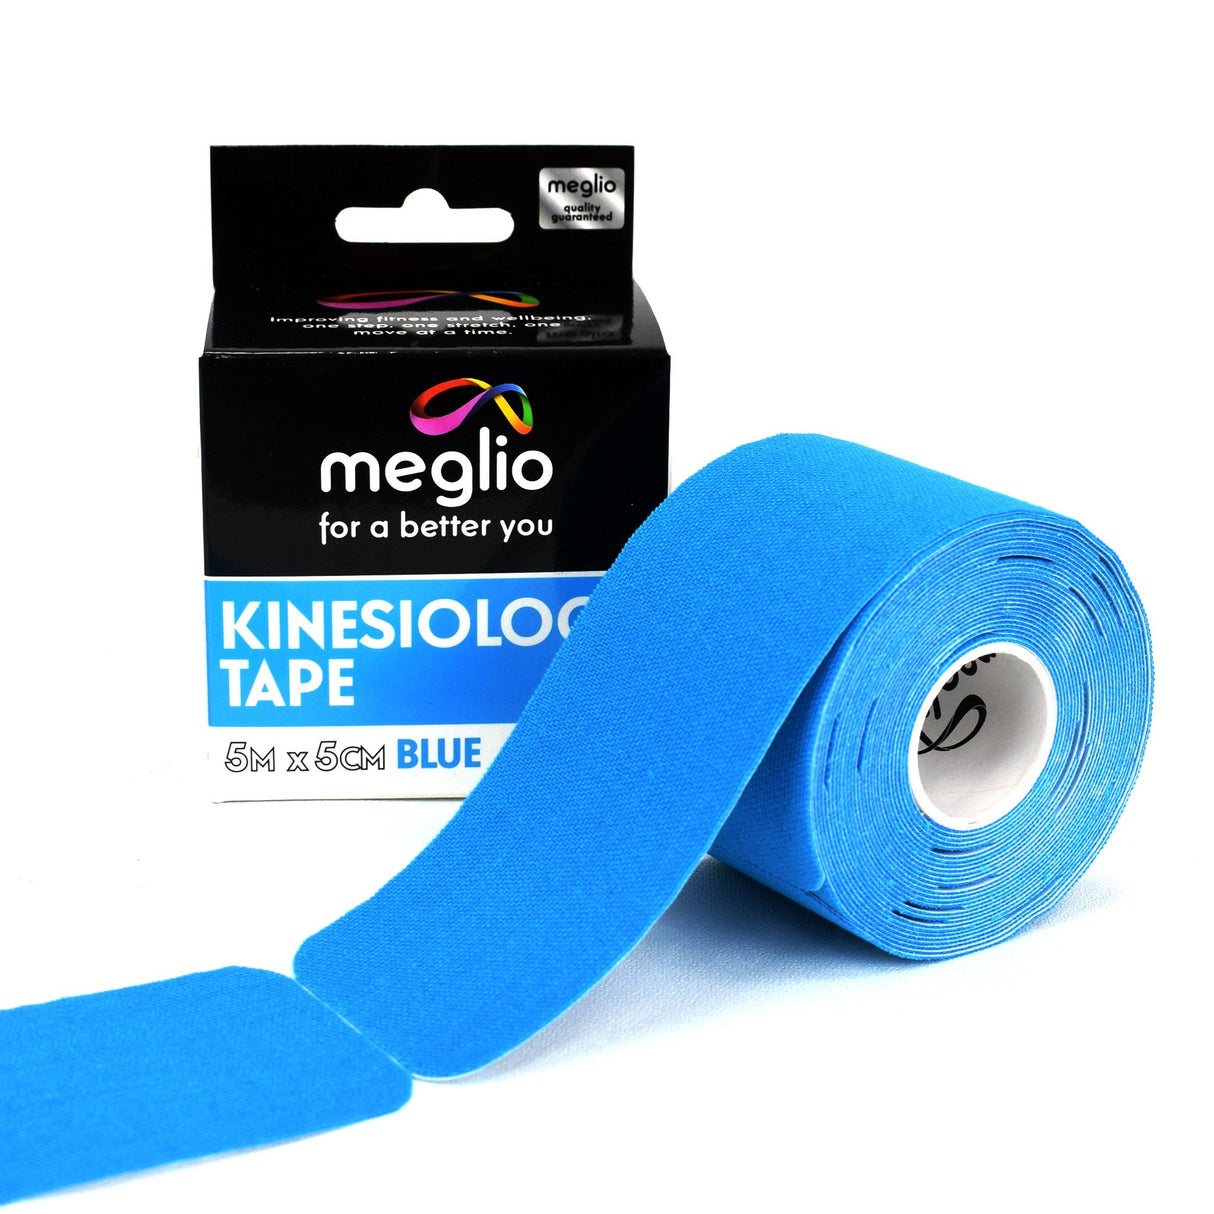 Kinesiology Tape by Meglio